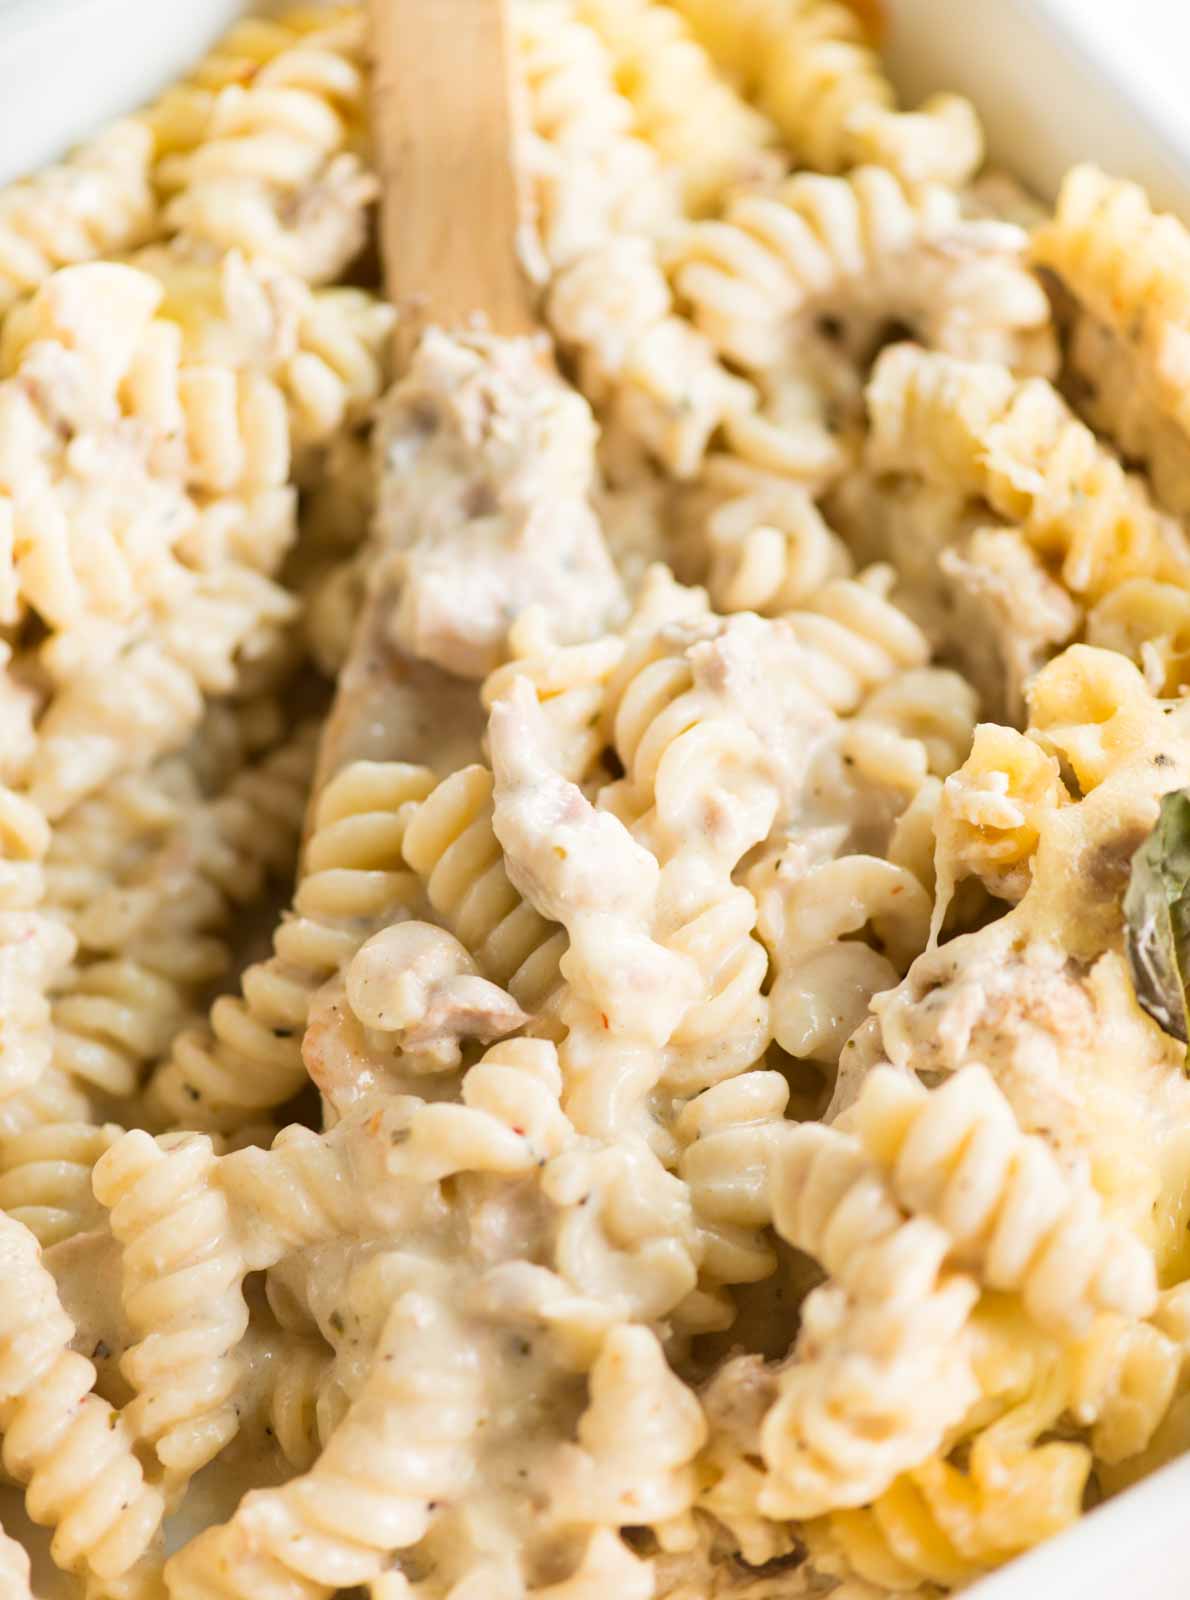 Creamy Tuna pasta is a comfort meal that the entire family loves. Canned tuna and pasta tossed in a creamy cheesy sauce and baked until bubbly. 